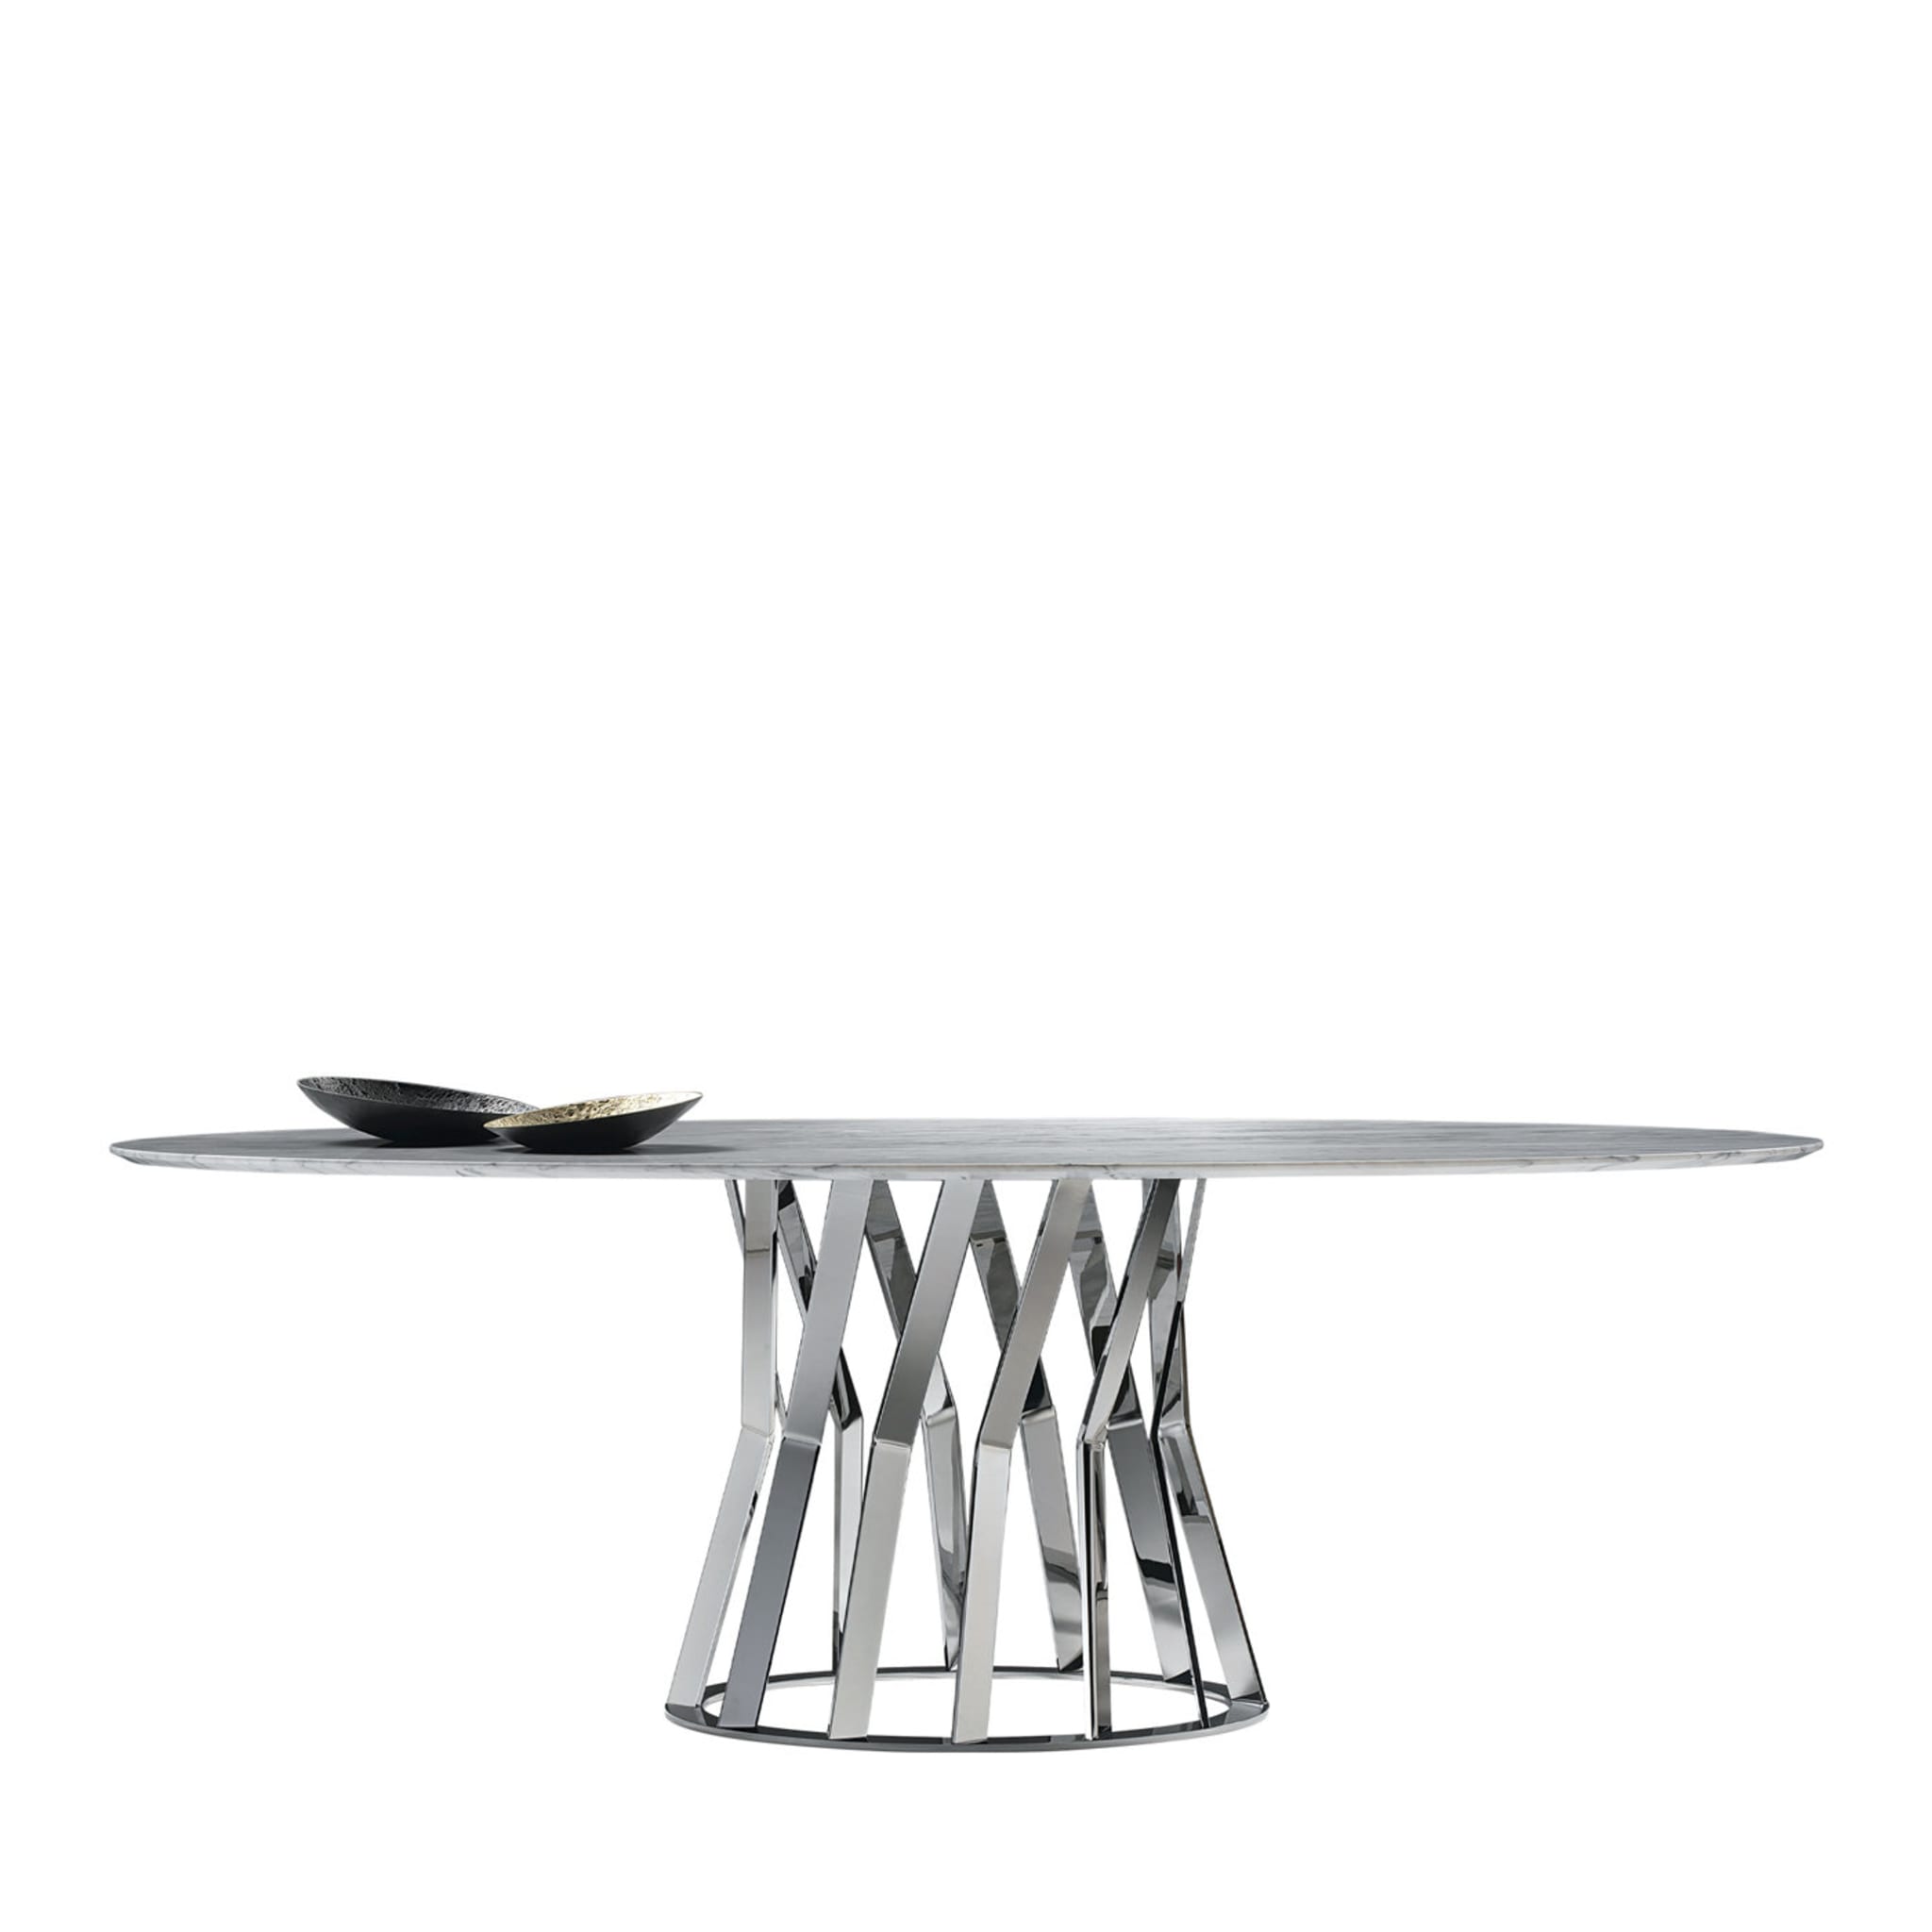 Ray Ed/20 353 Chrome Dining Table By Stefano Bettio - Main view